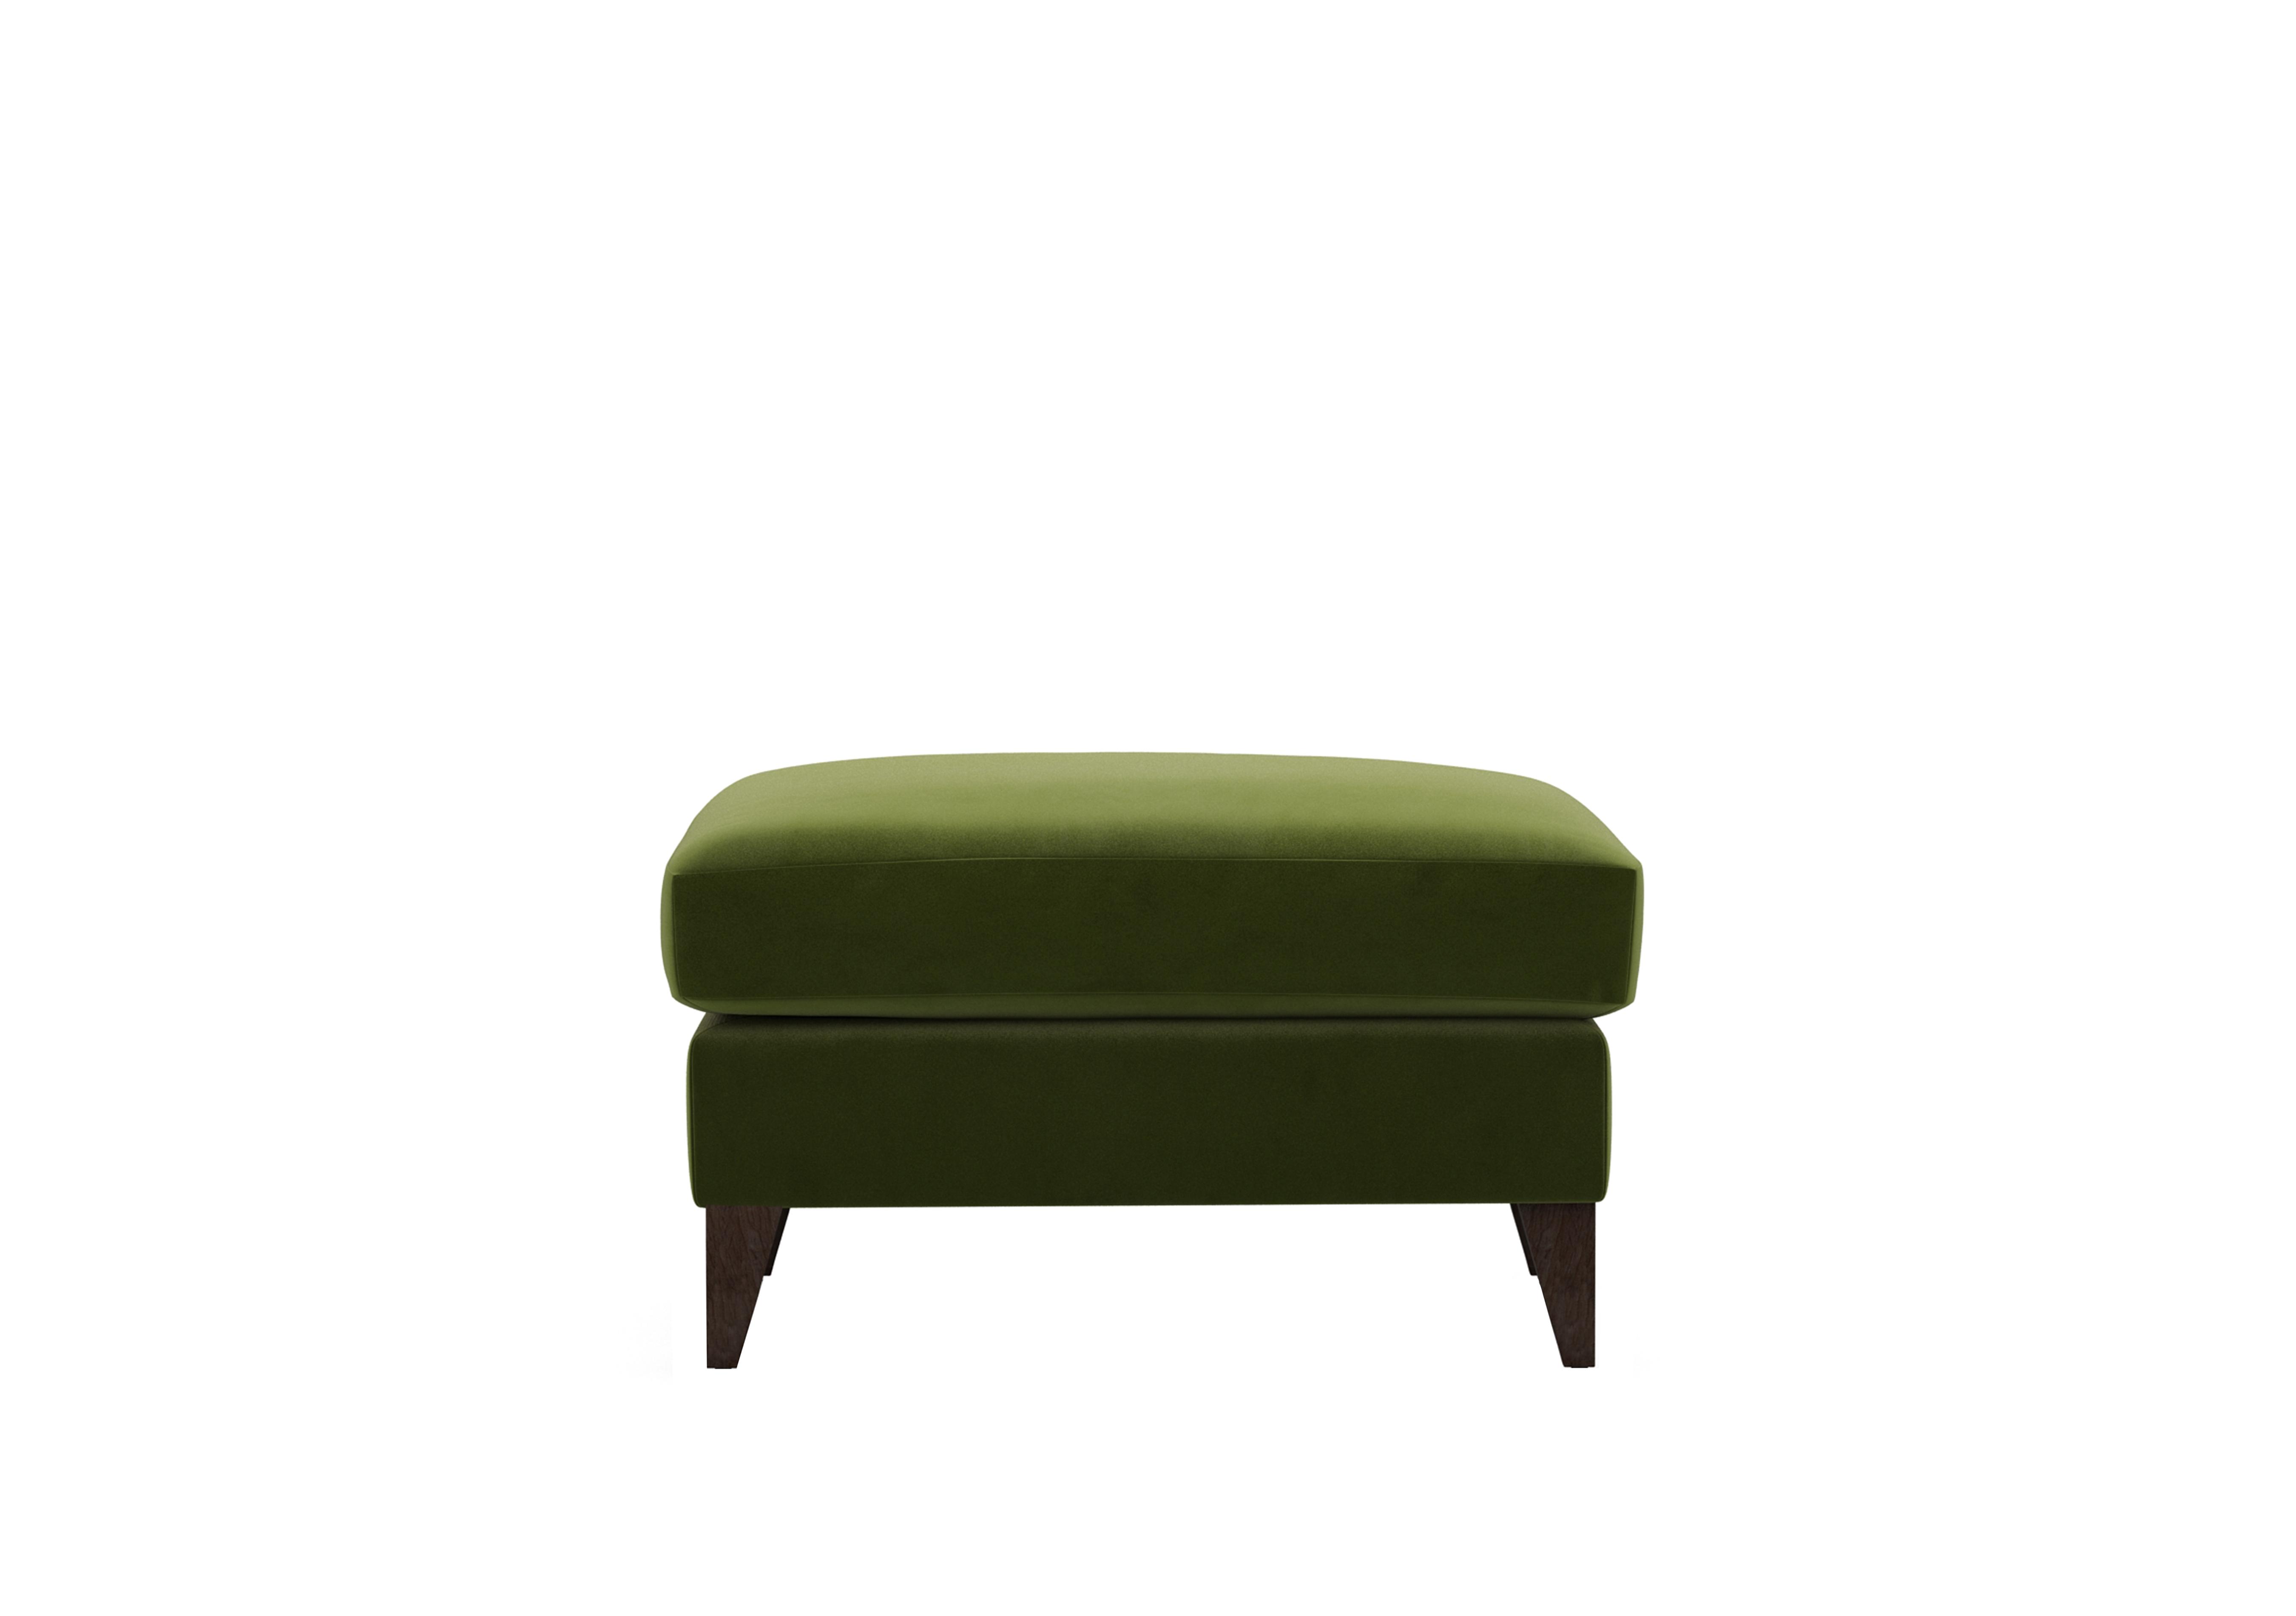 Romilly Fabric Footstool in Woo160 Woodland Moss Wa Ft on Furniture Village